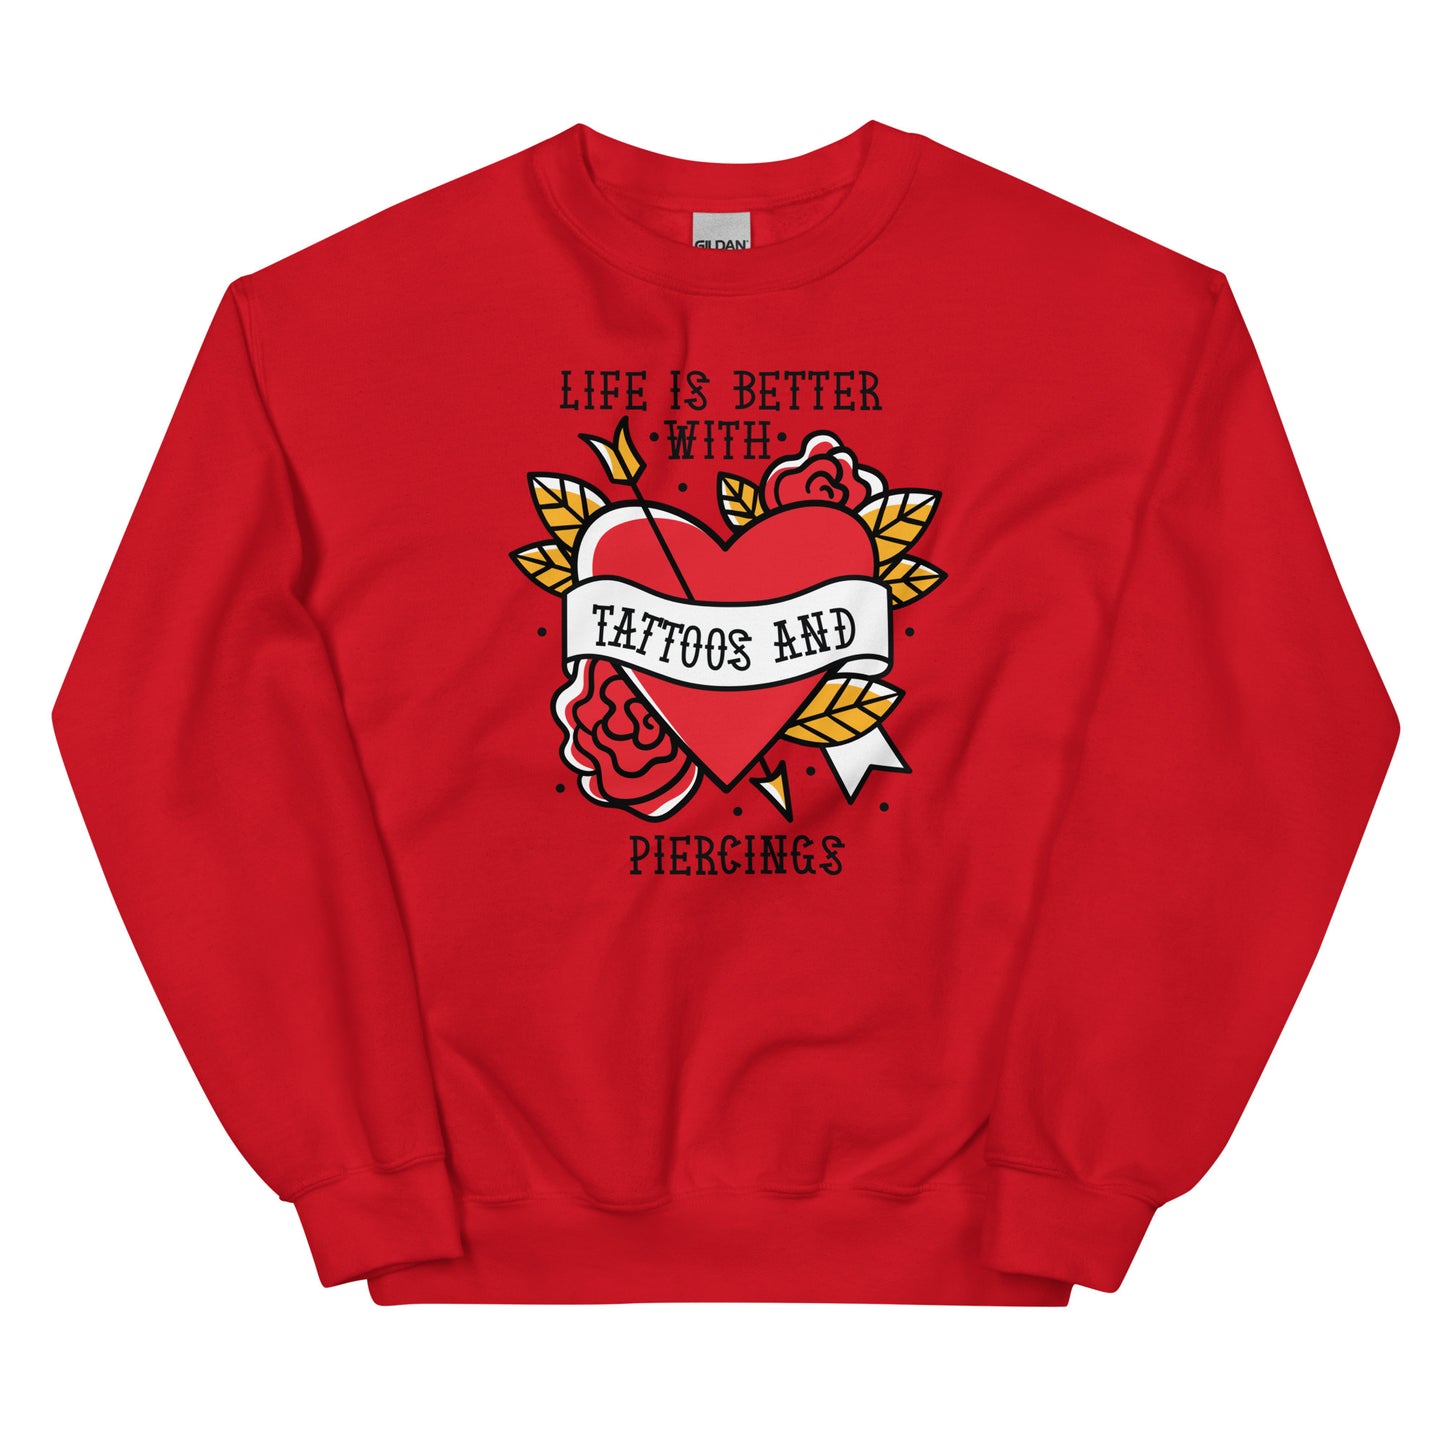 Life is Better With Tattoos and Piercings Unisex Sweatshirt